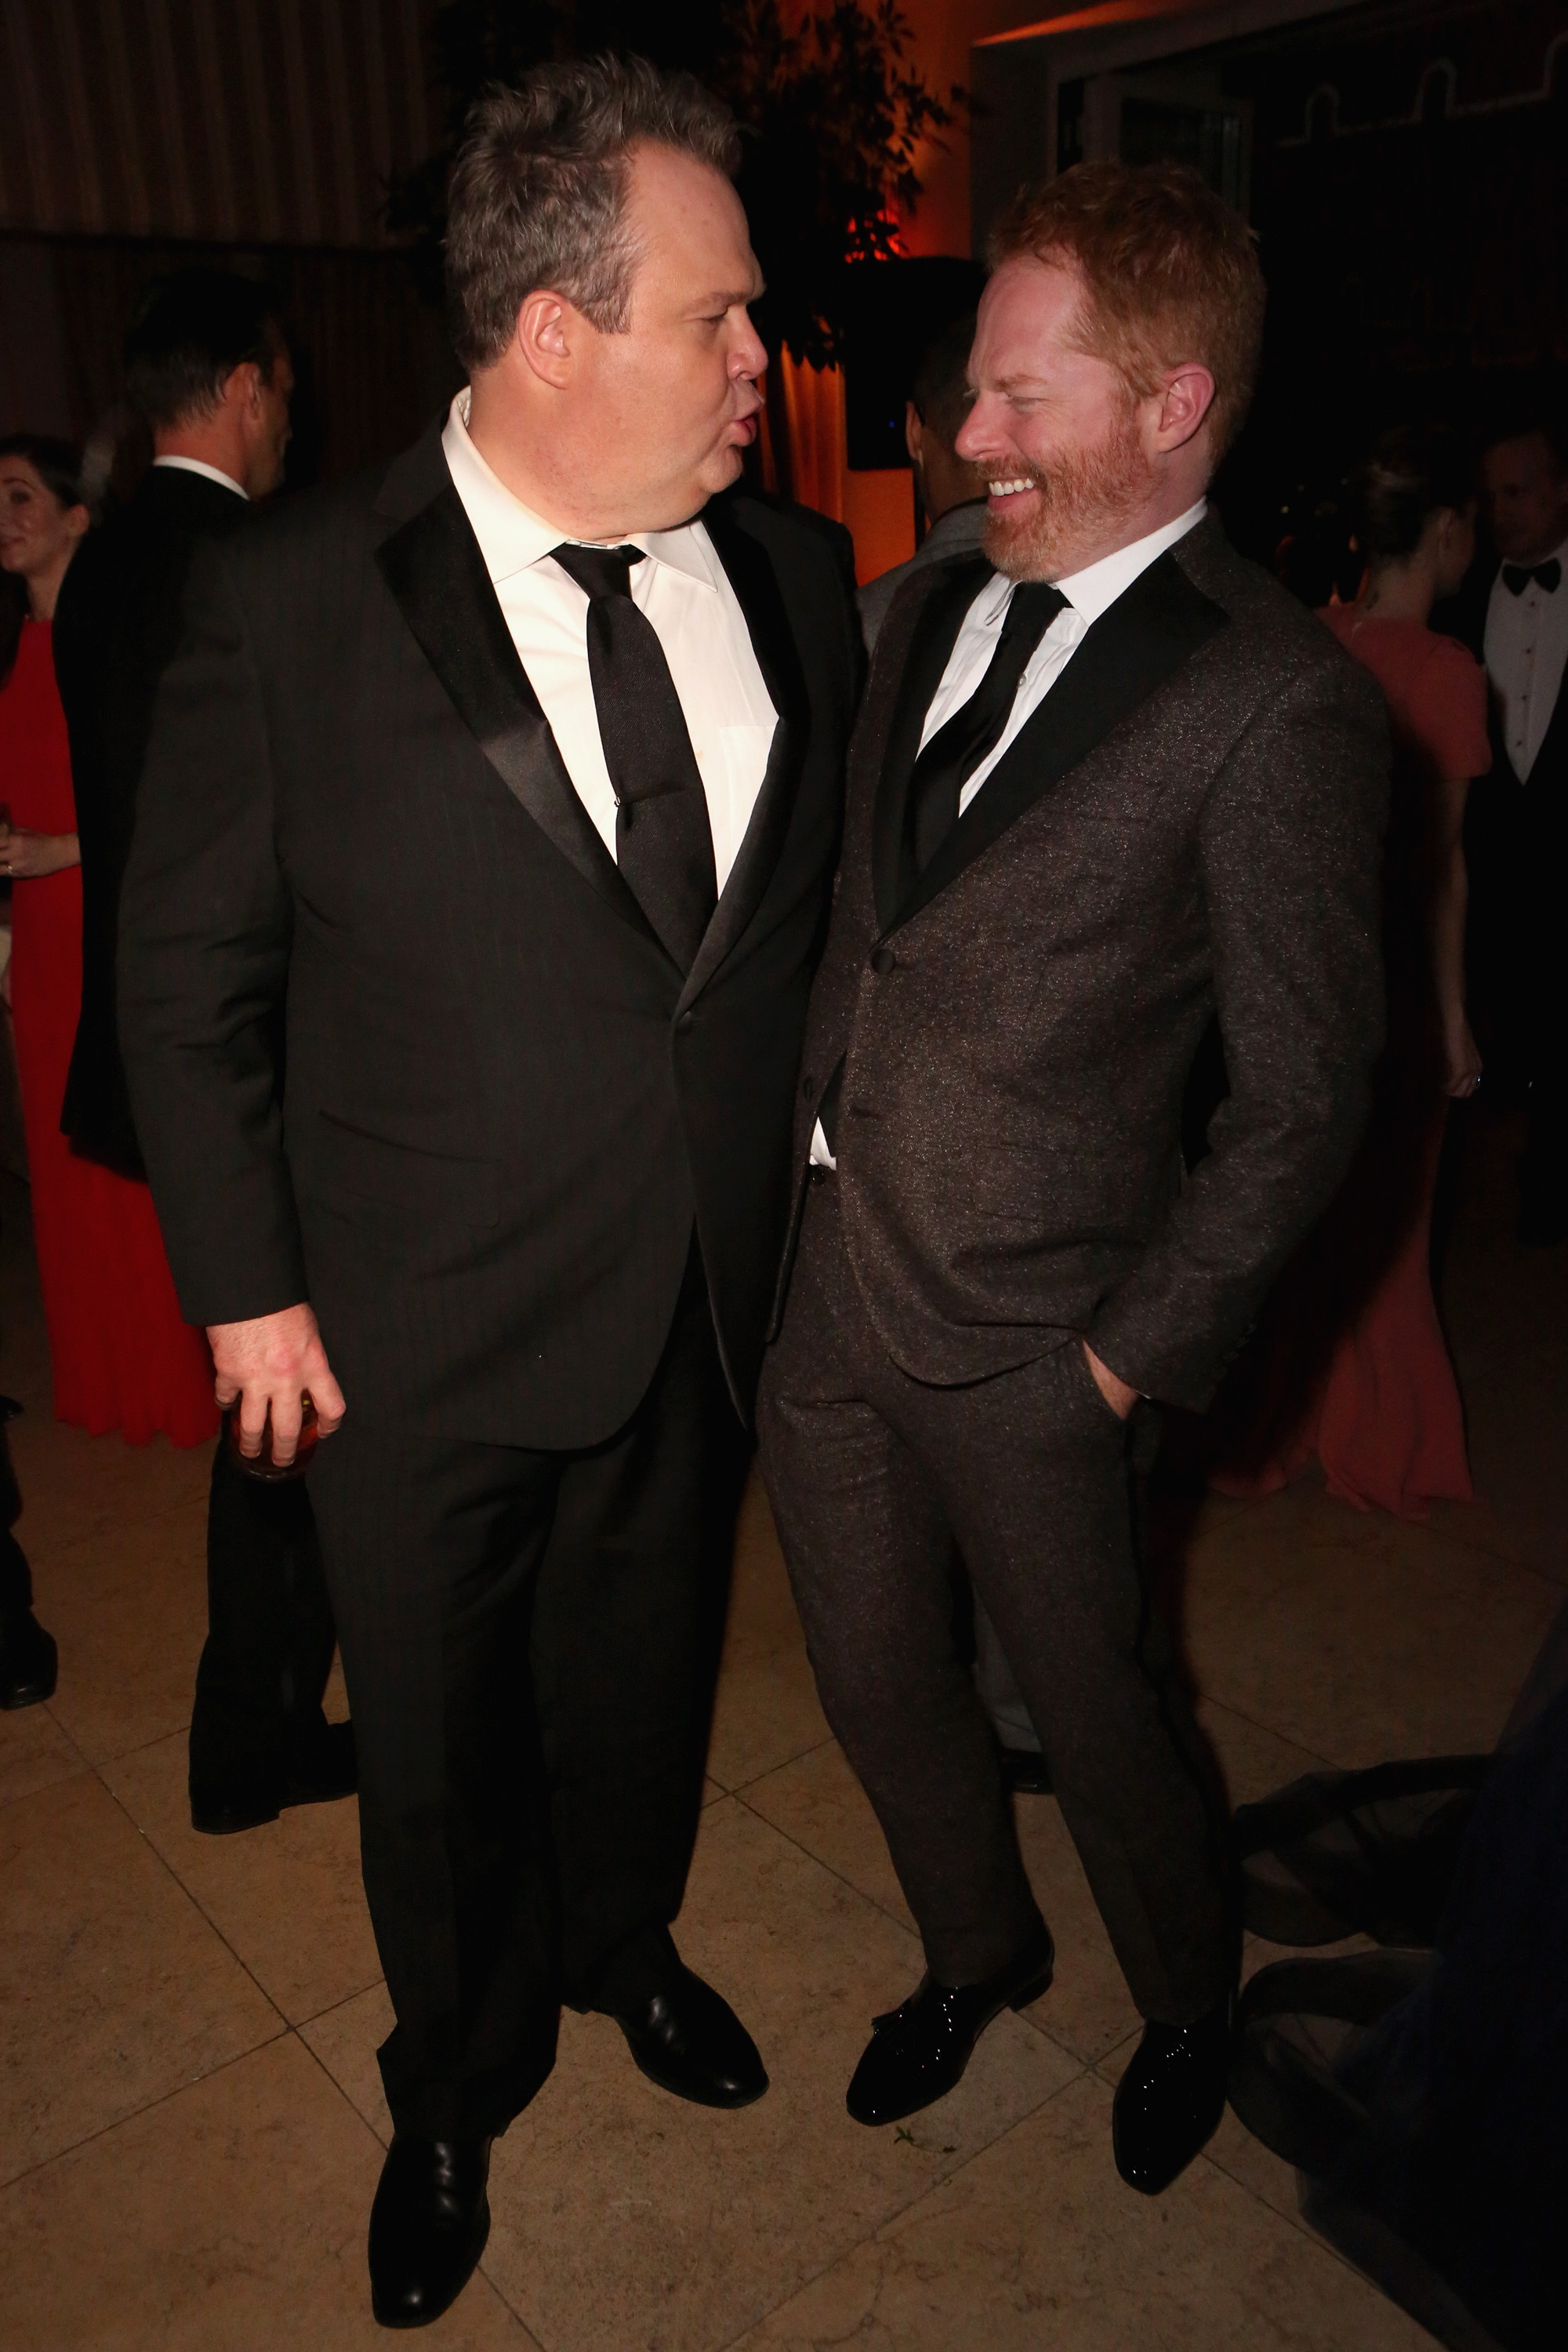 Actors Eric Stonestreet and Jesse Tyler Ferguson (R) attend The Weinstein Company & Netflix's 2015 SAG After Party